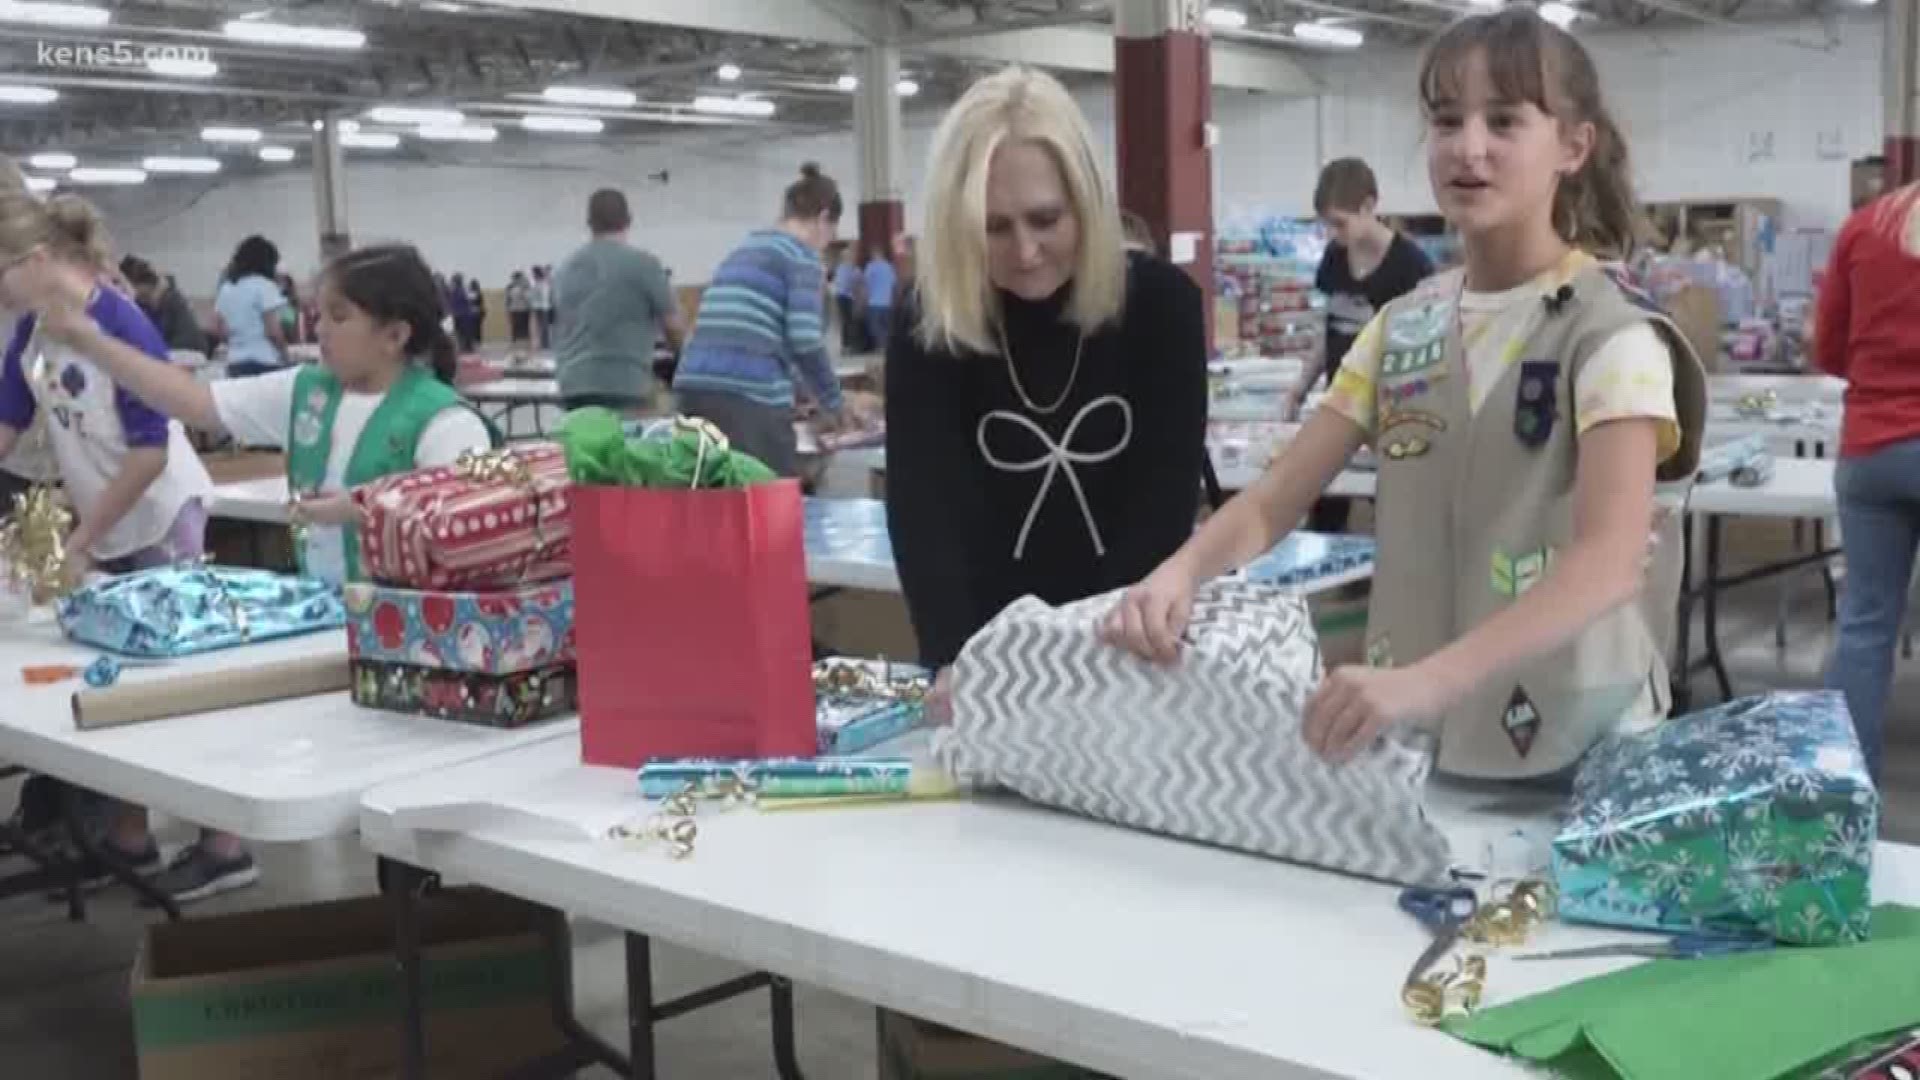 It takes many hands to make Christmas special for 20,000 kids. Hundreds of volunteers are working to make the holidays happy for Bexar County's less fortunate kids.